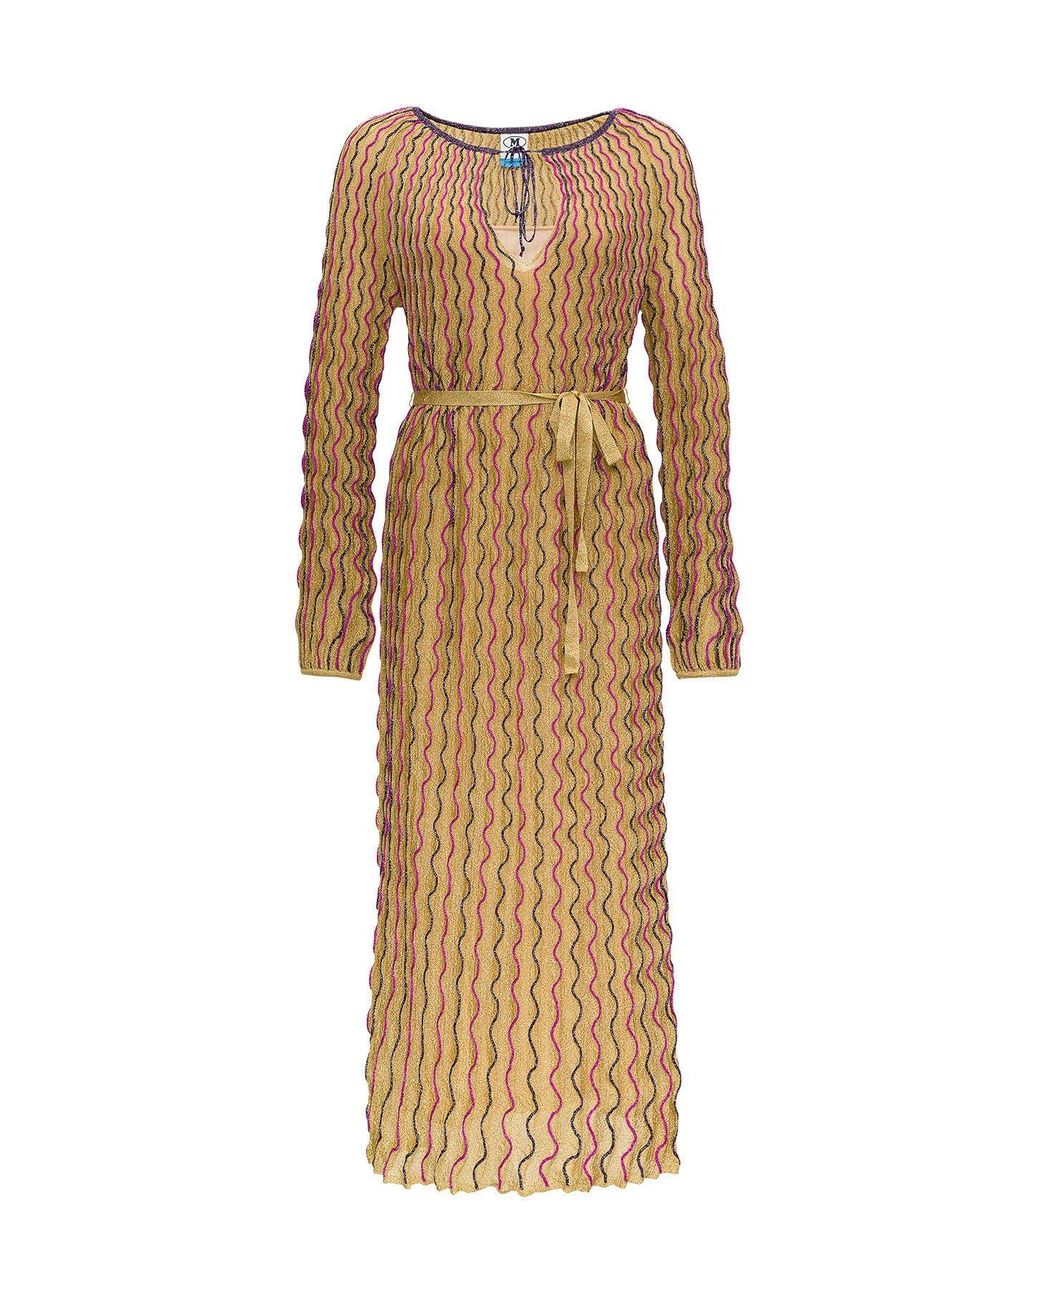 M Missoni Synthetic Gold Dress in Metallic - Save 10% - Lyst